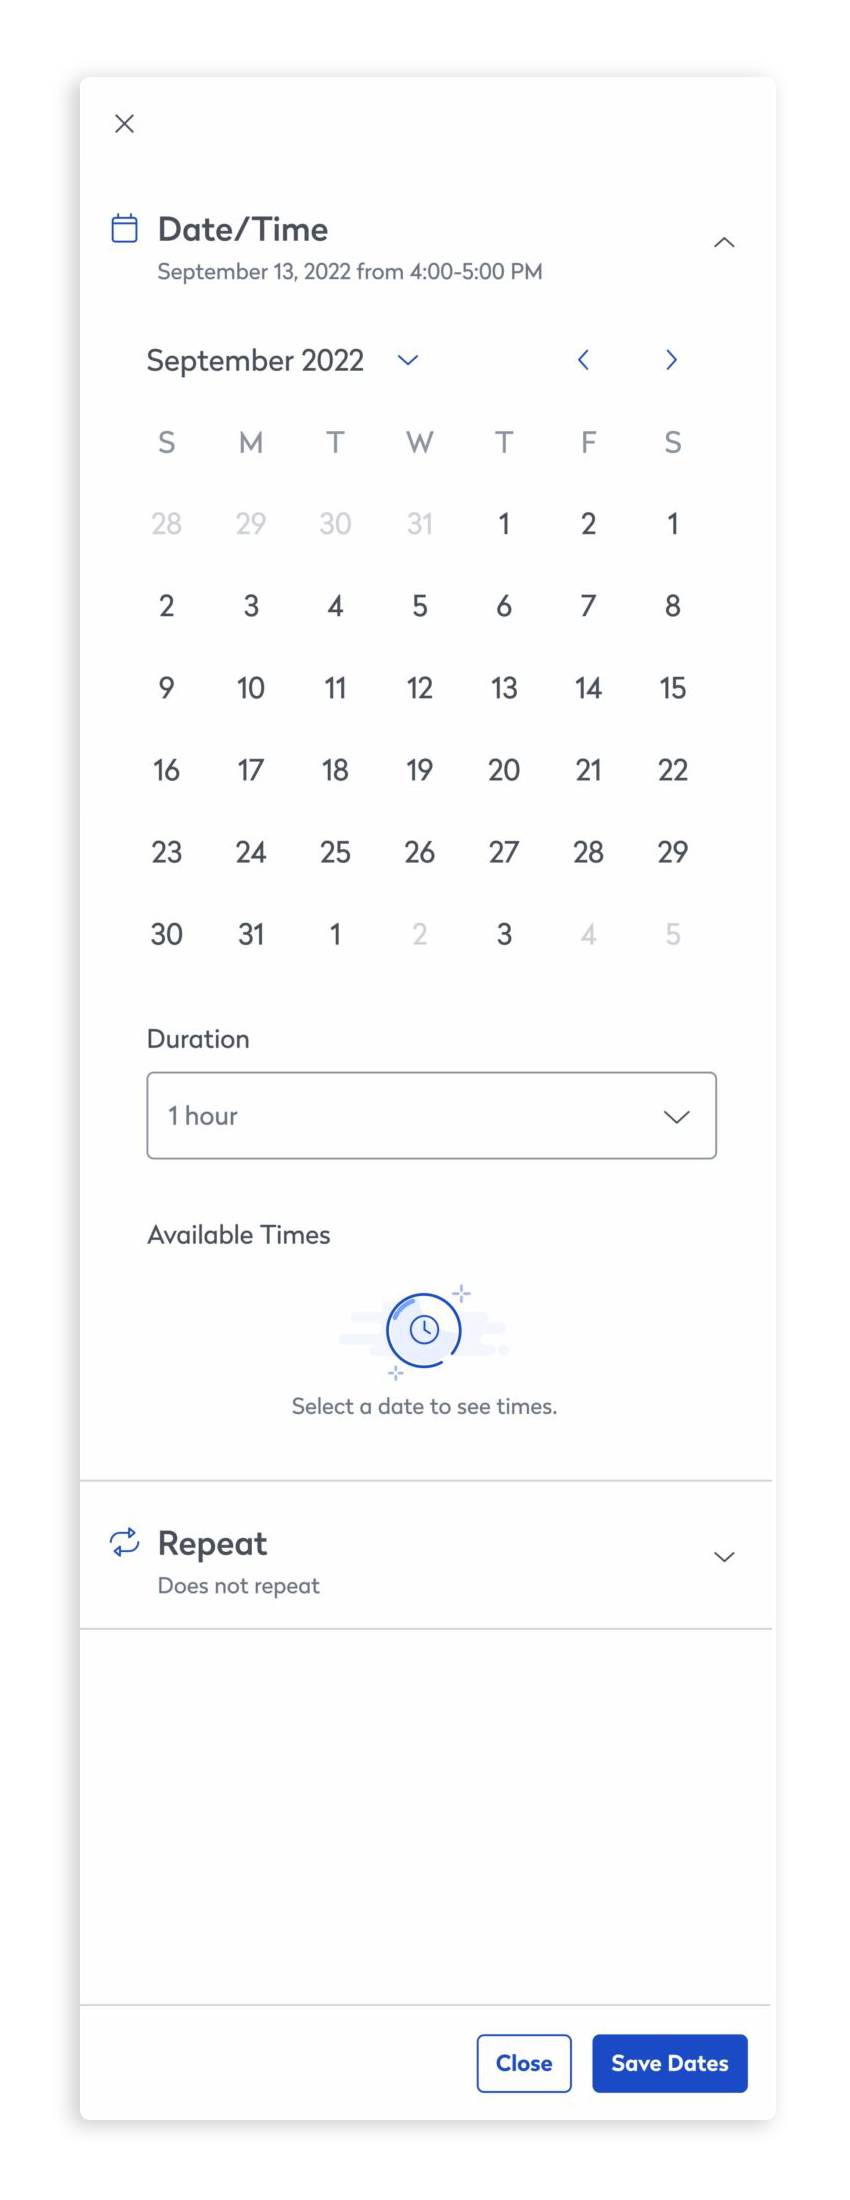 If a date has not been selected, users will see an empty state prompting them to select a date.